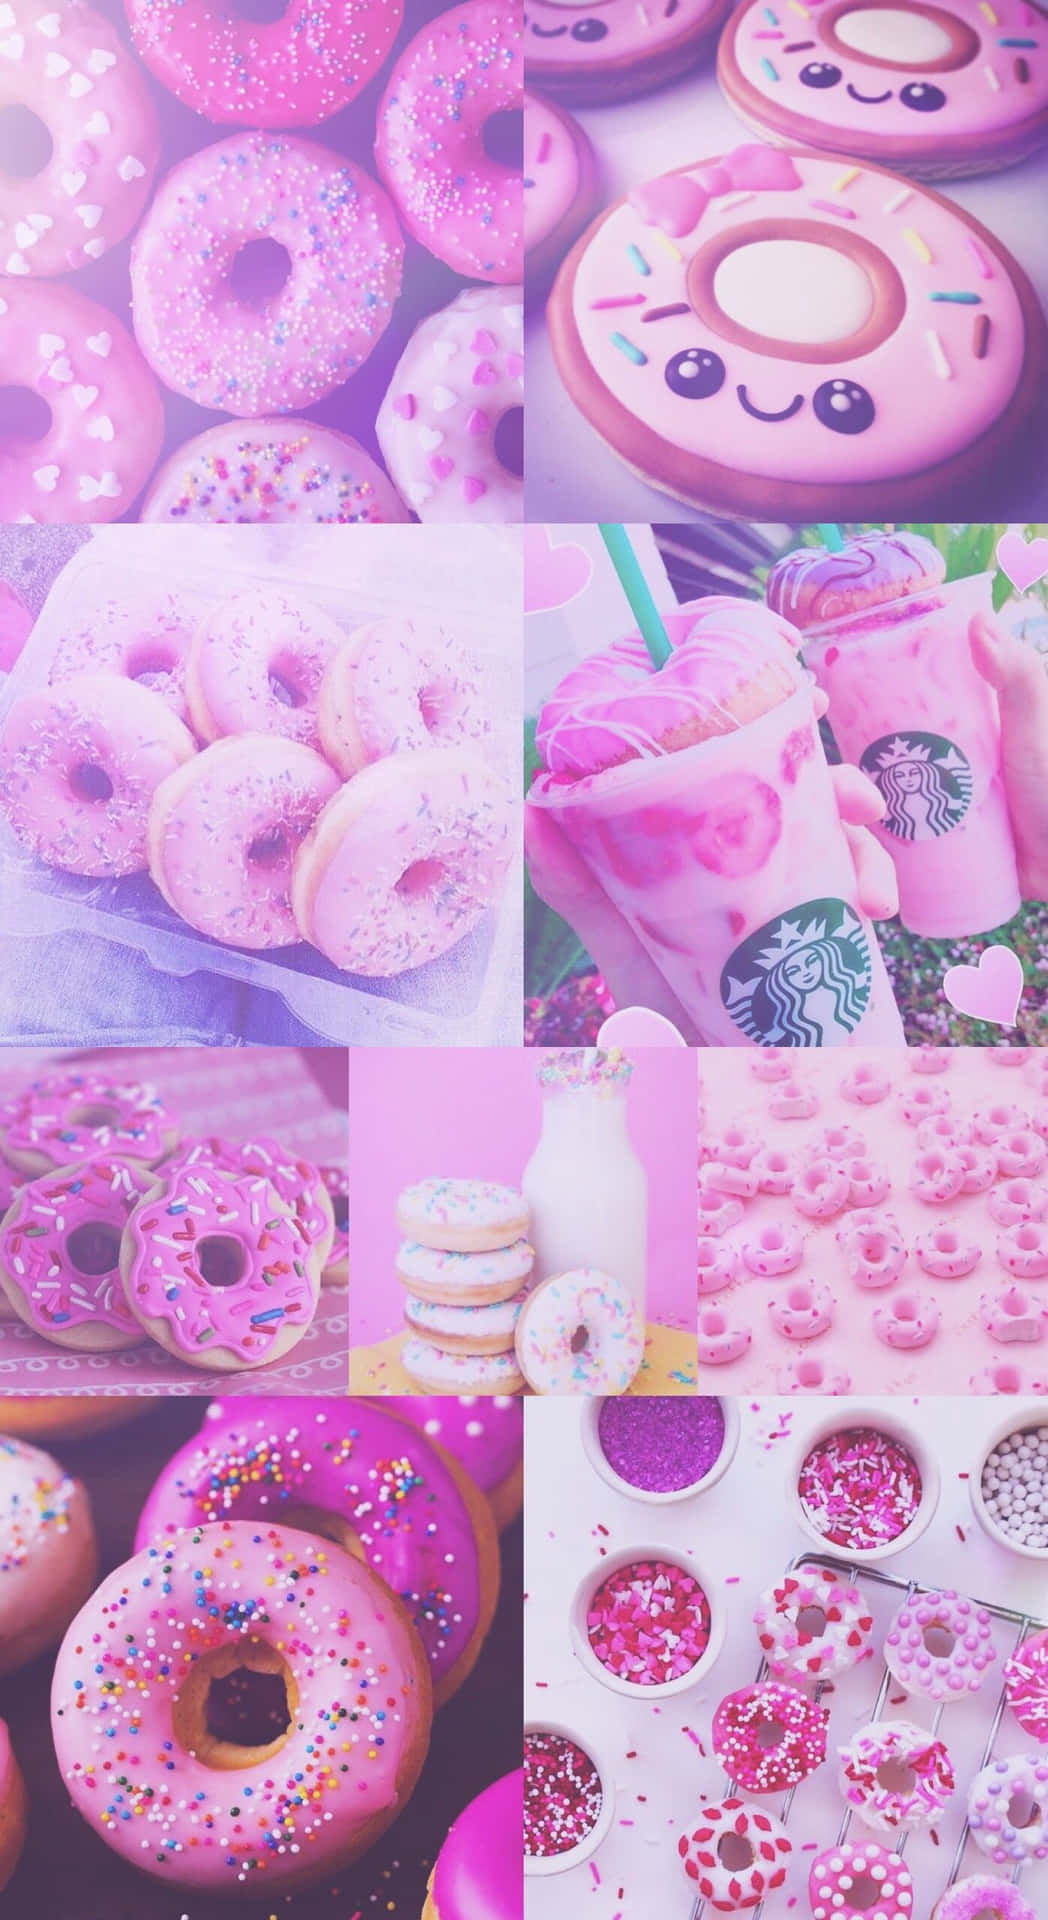 Cute Donut on a Pink Background Wallpaper